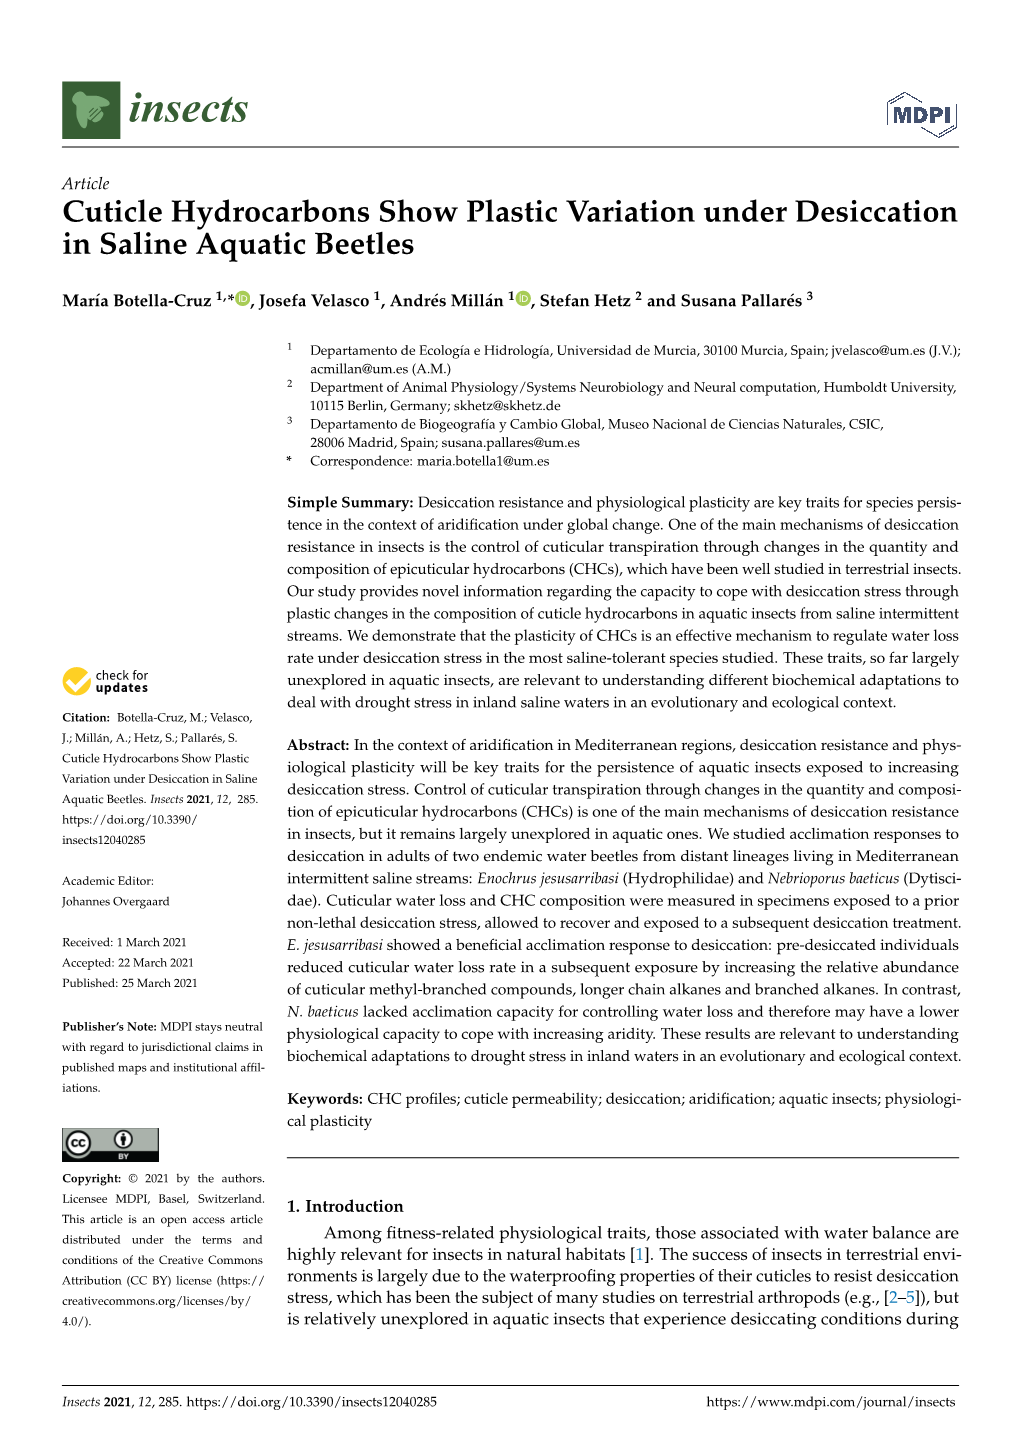 Cuticle Hydrocarbons Show Plastic Variation Under Desiccation in Saline Aquatic Beetles